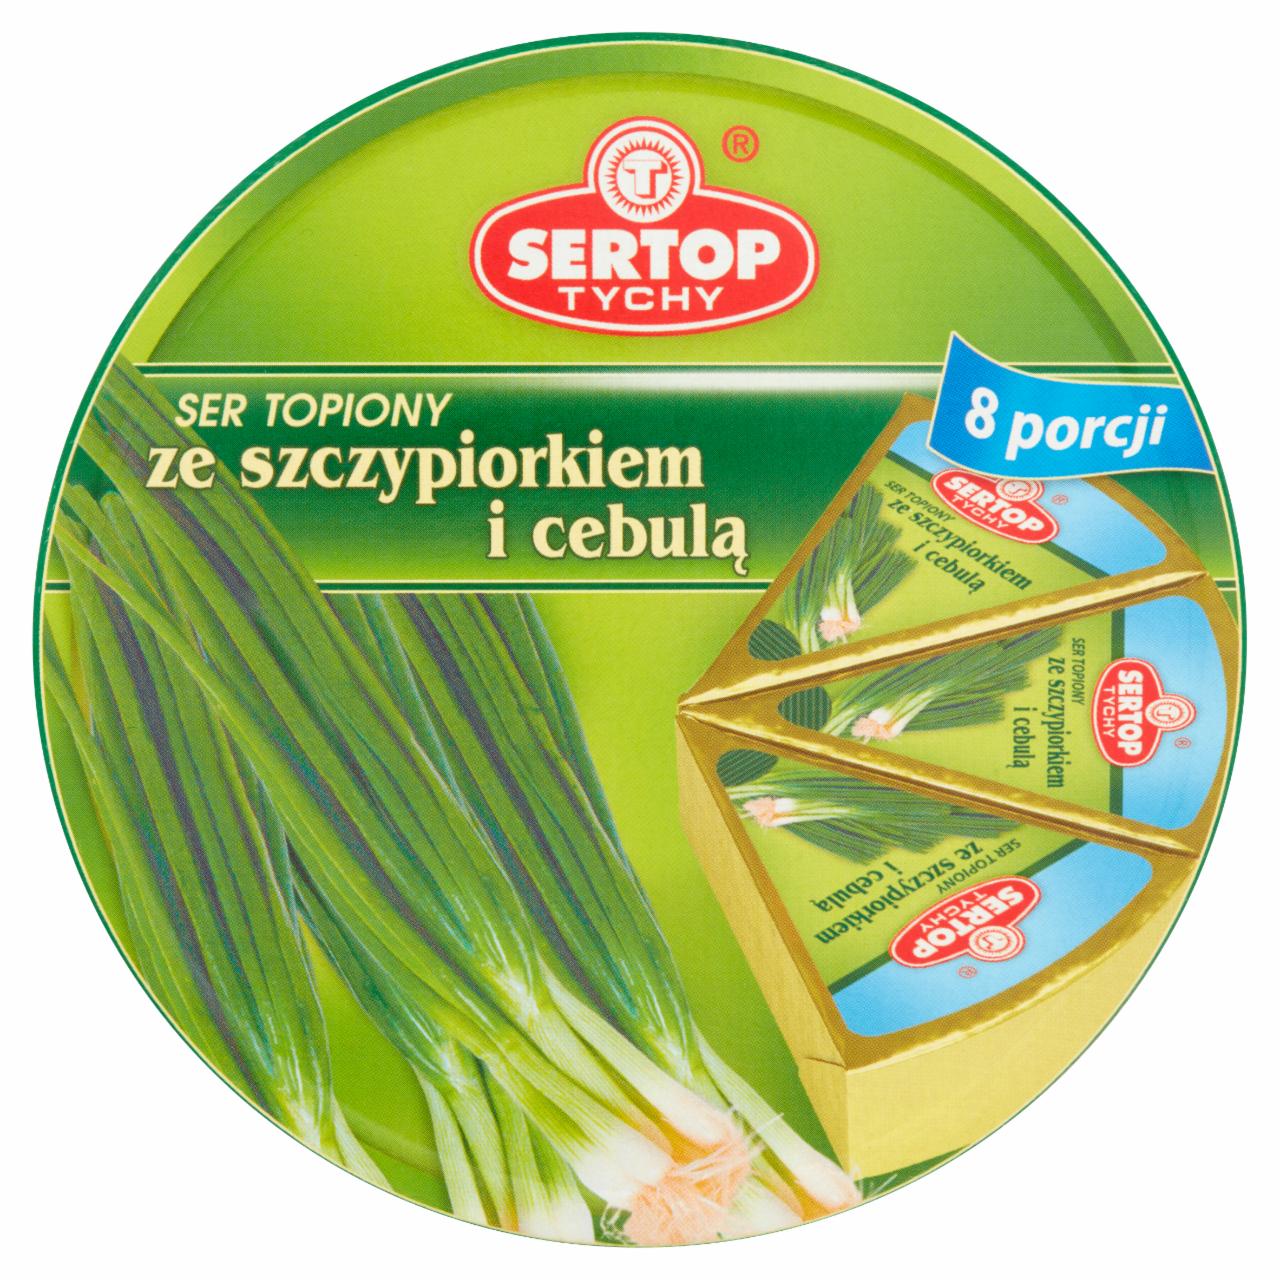 Photo - Sertop Tychy Processed Cheese with Chive and Onion 140 g (8 Portions)